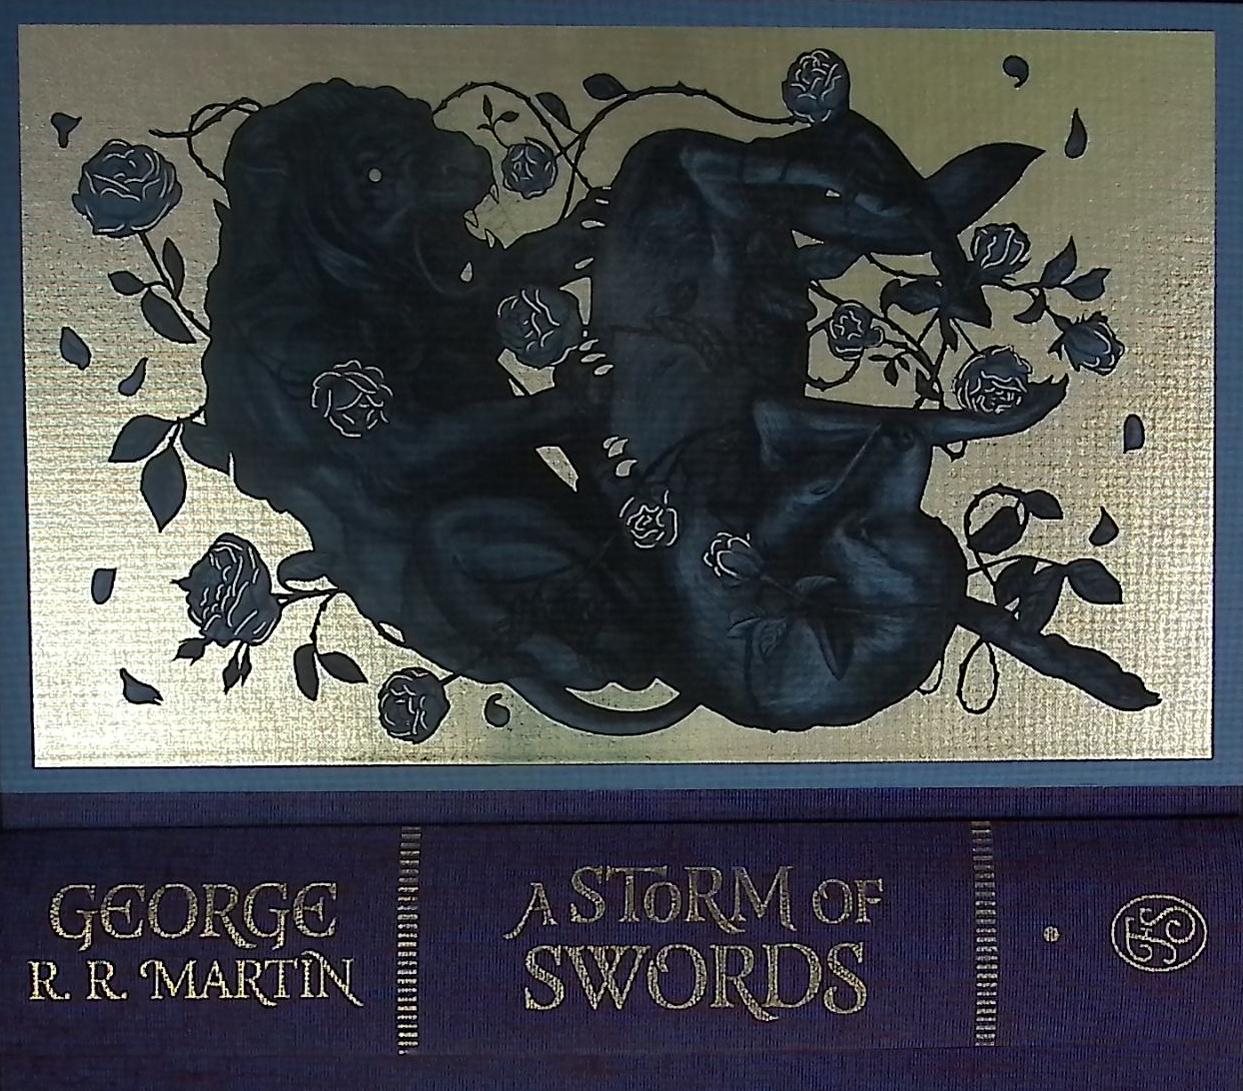 A Storm of Swords. 2 volume set. [A Song of Ice and Fire Book 3]